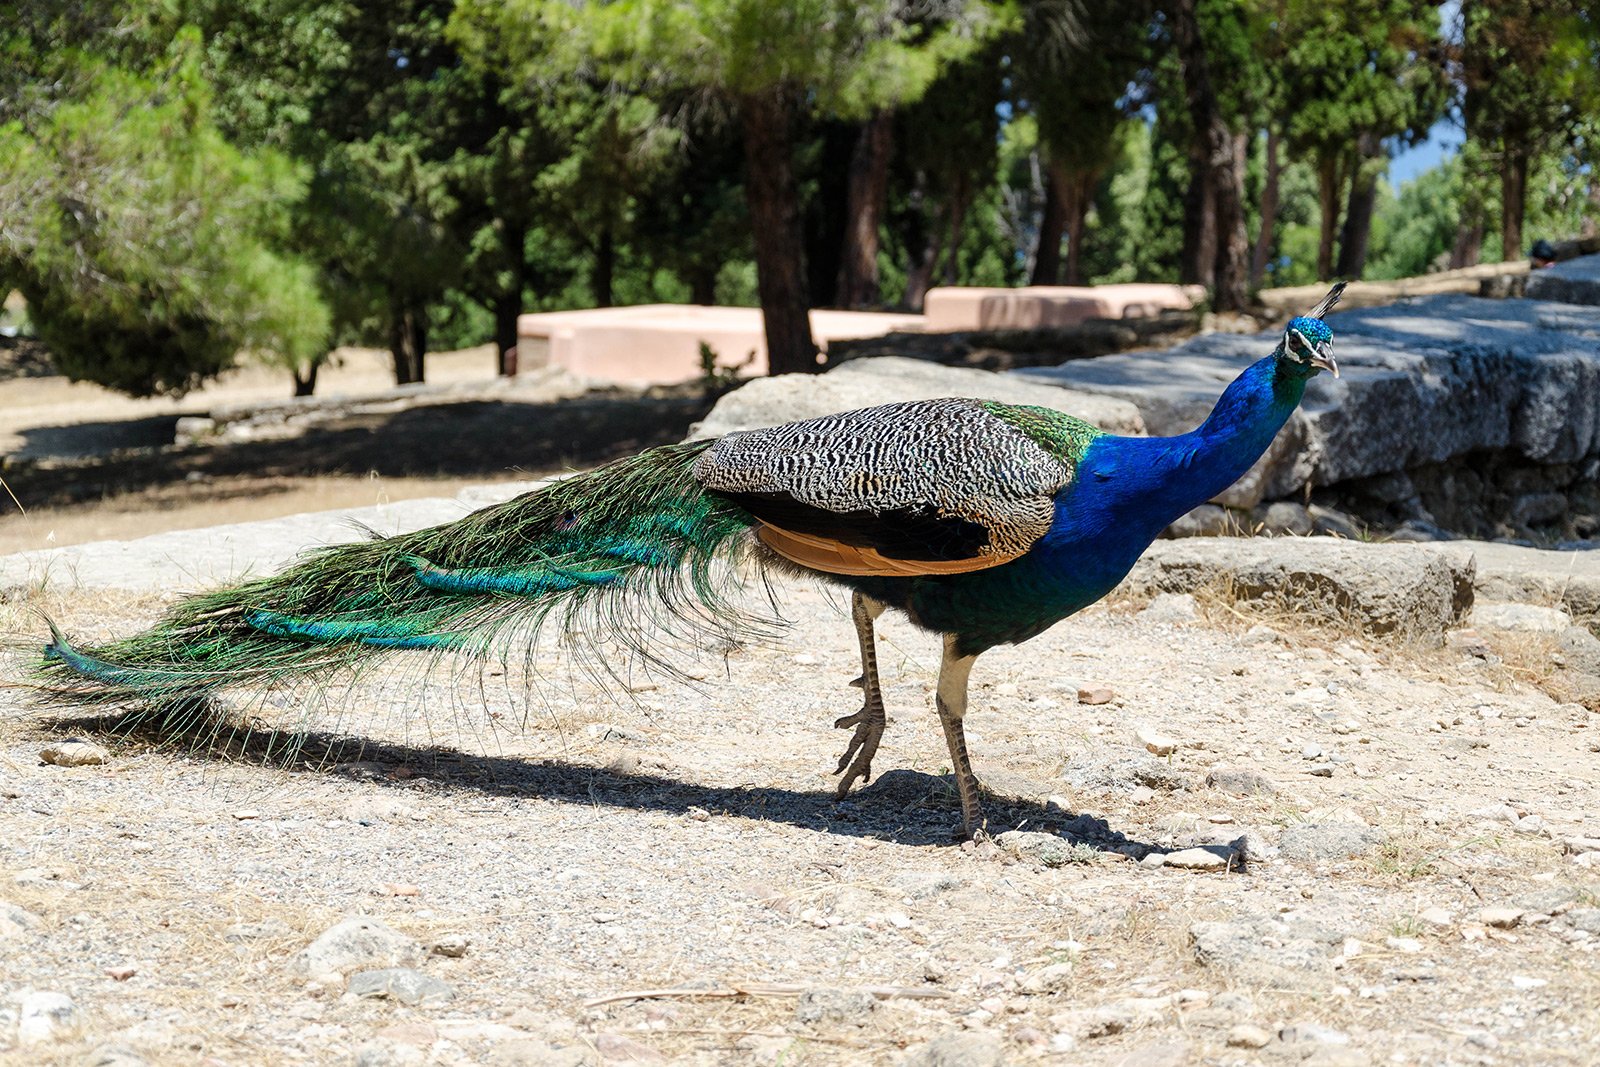 How to see peacocks on Rhodes